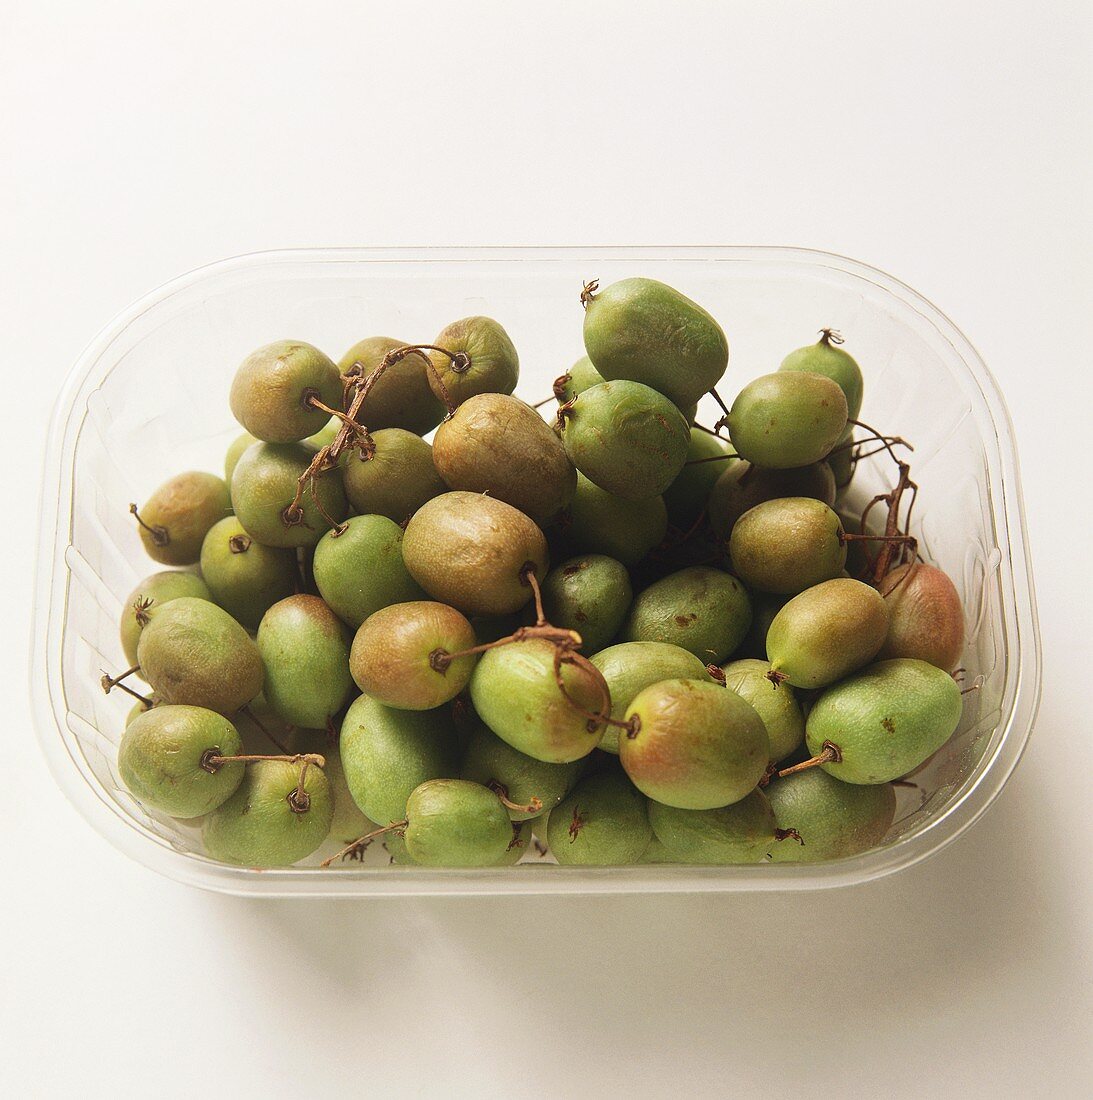 Weikis (Bavarian kiwi fruits) in plastic container